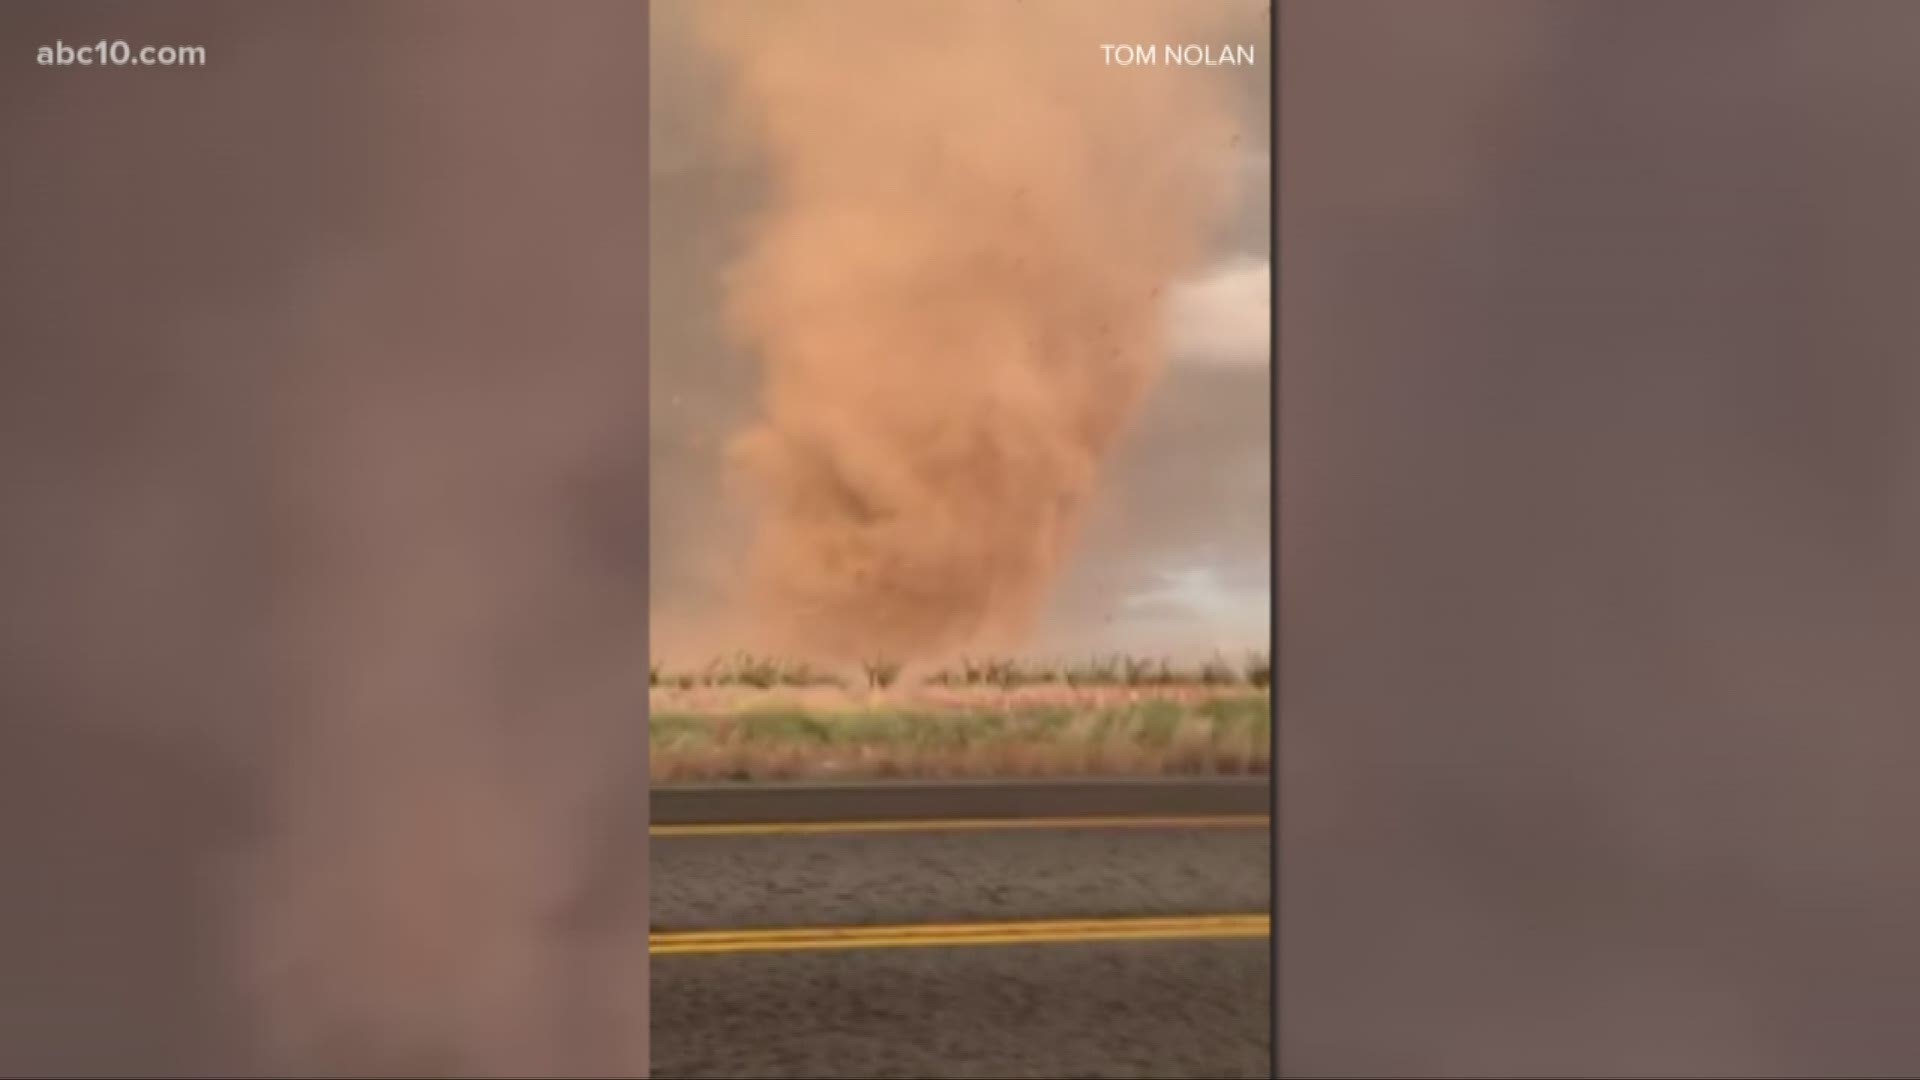 Tom Nolan and his girlfriend captured video of the EF-0 tornado touching down near Davis. Their video has been seen thousands of times online.